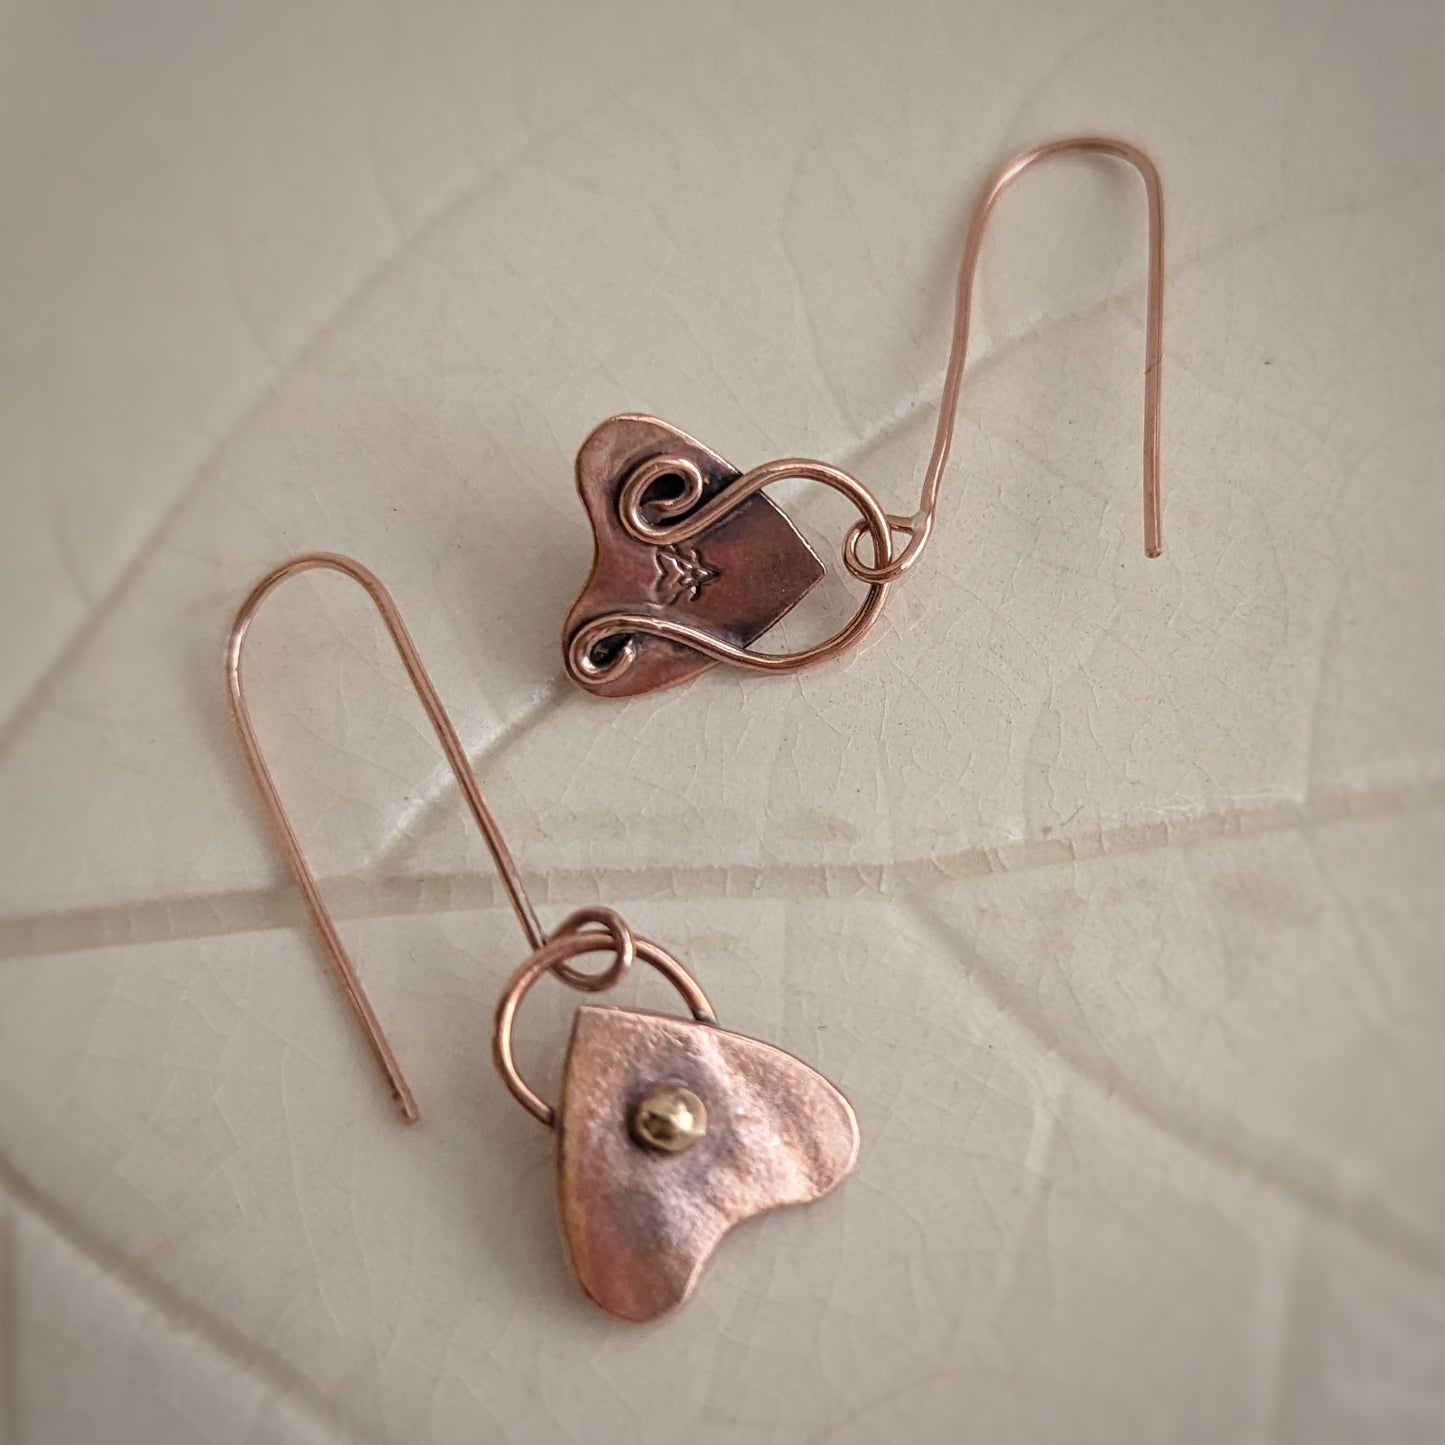 Tiny copper planchettes have a gold brass round pip in the viewing area and a swirling bail back on long copper hooks.